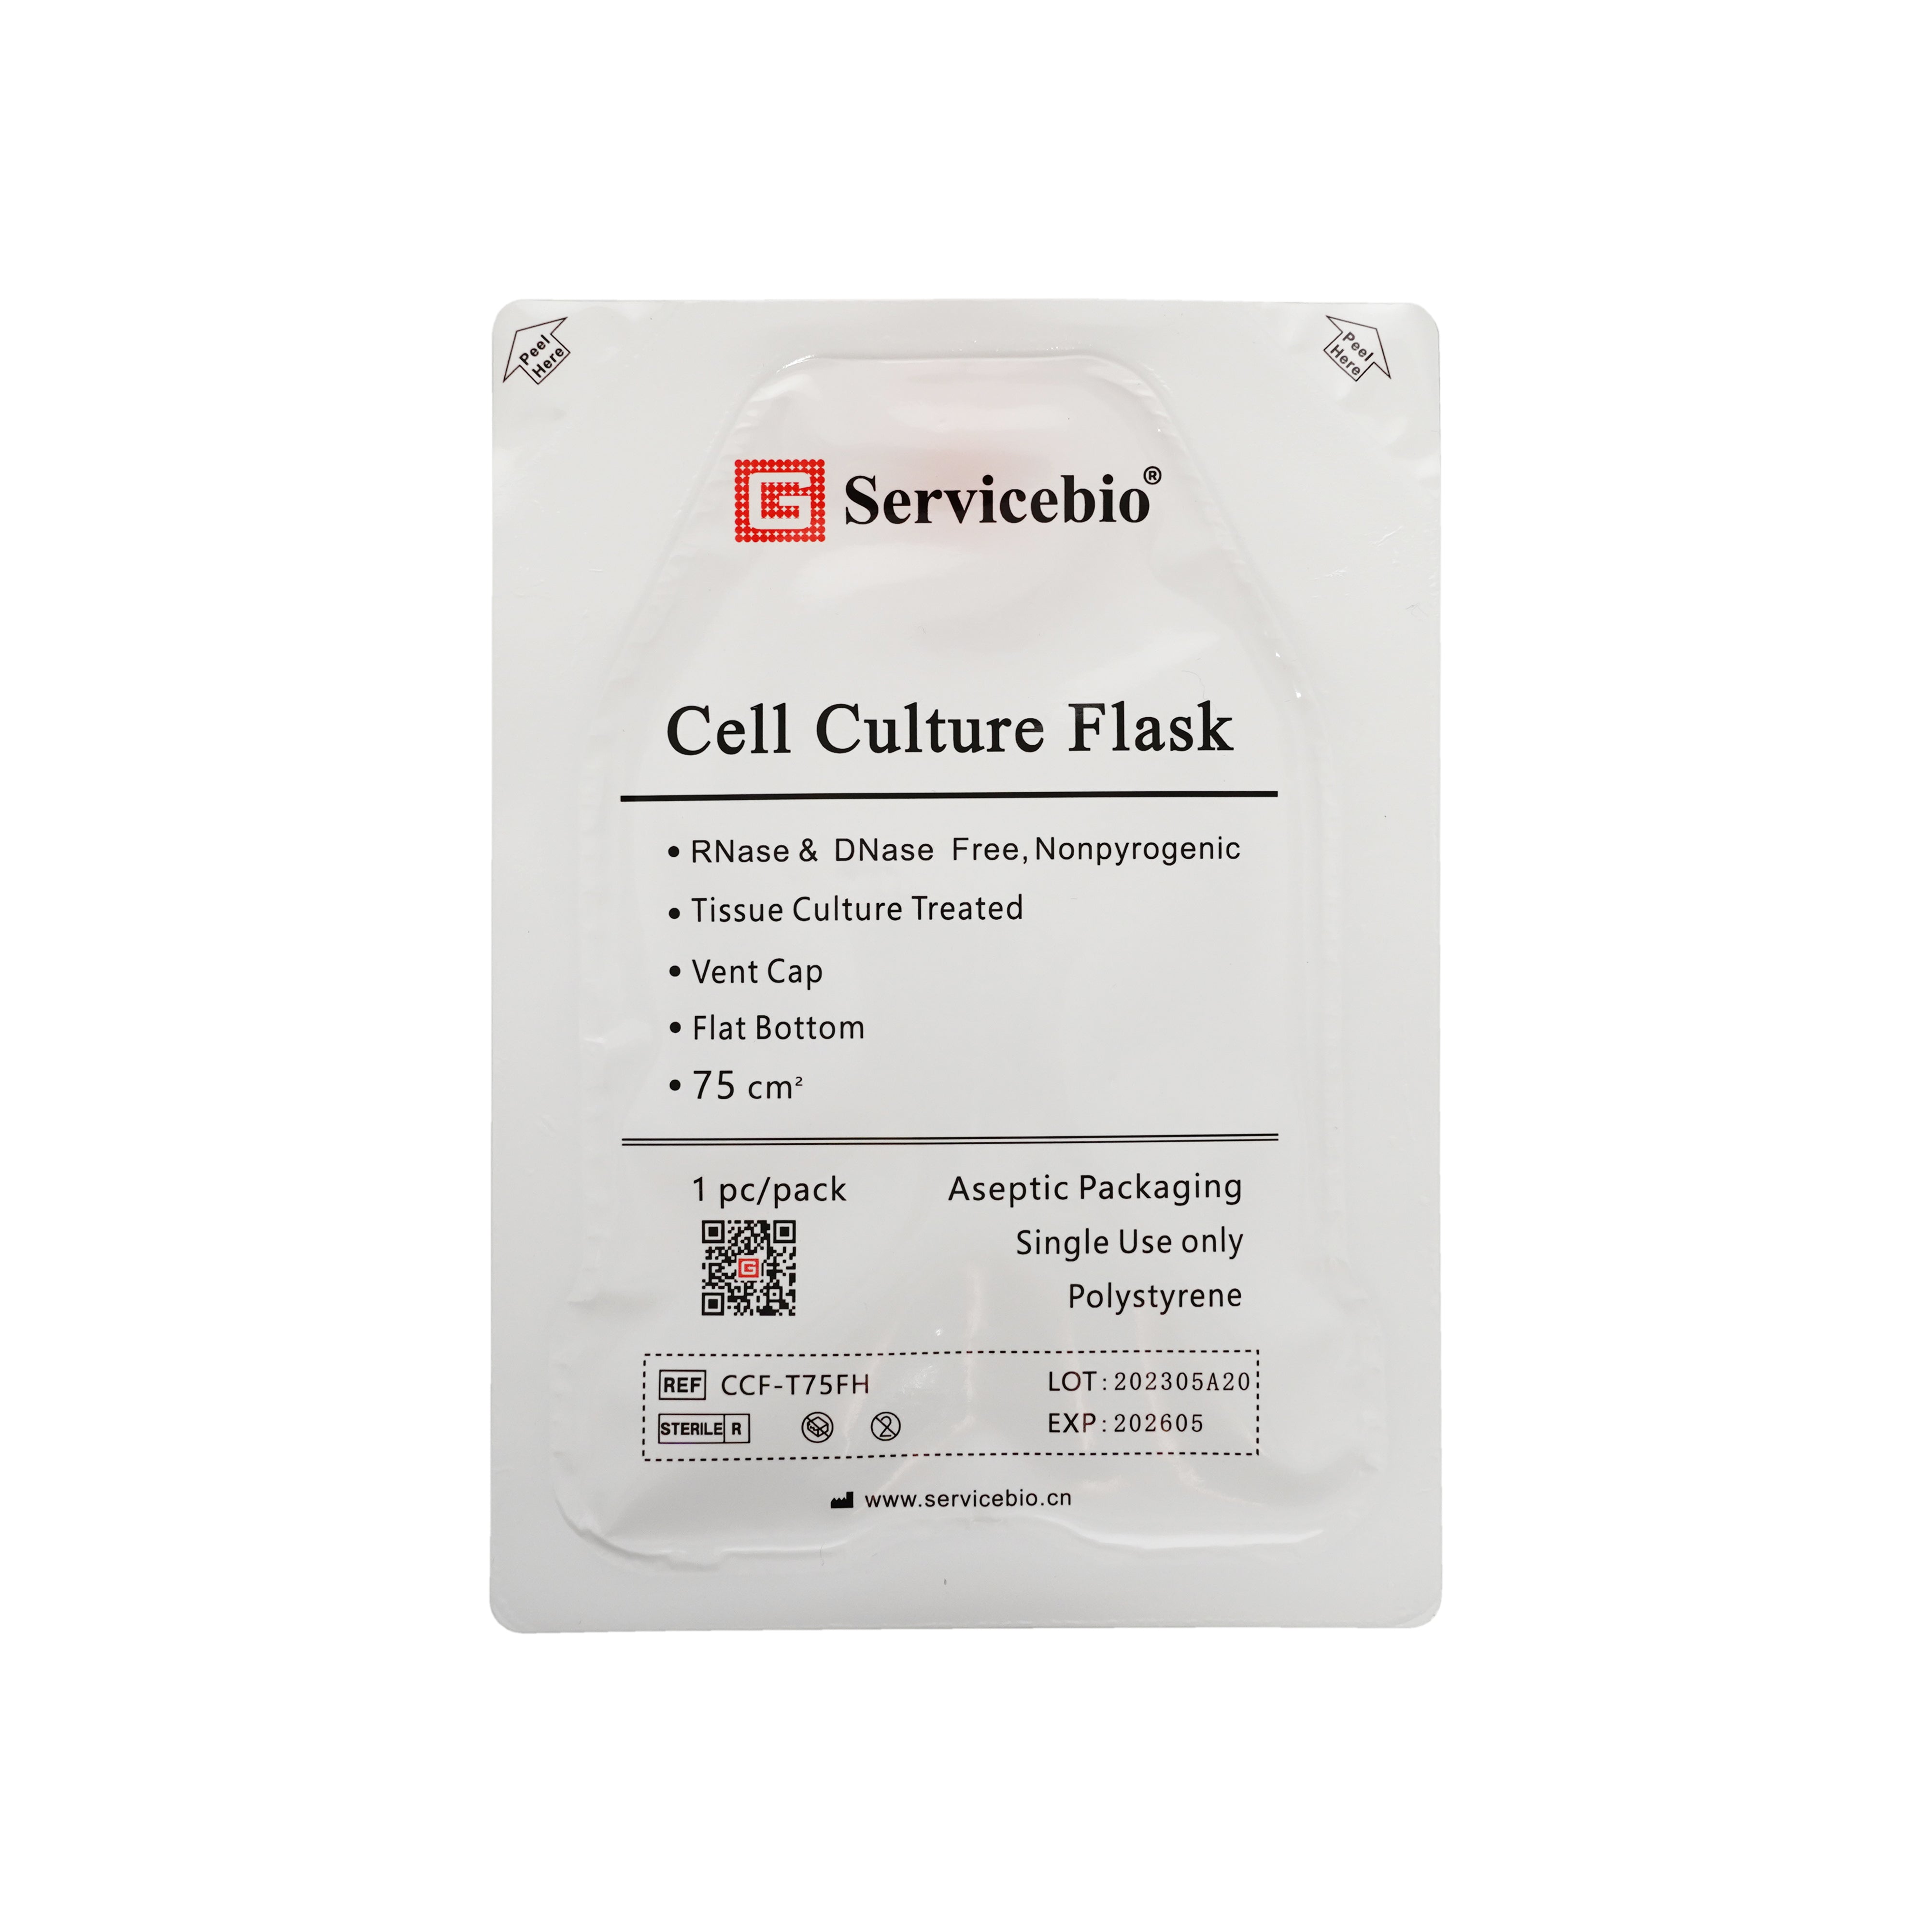 Cell culture flask, surface area 75 cm2, angled neck, vented cap. Individually packaged